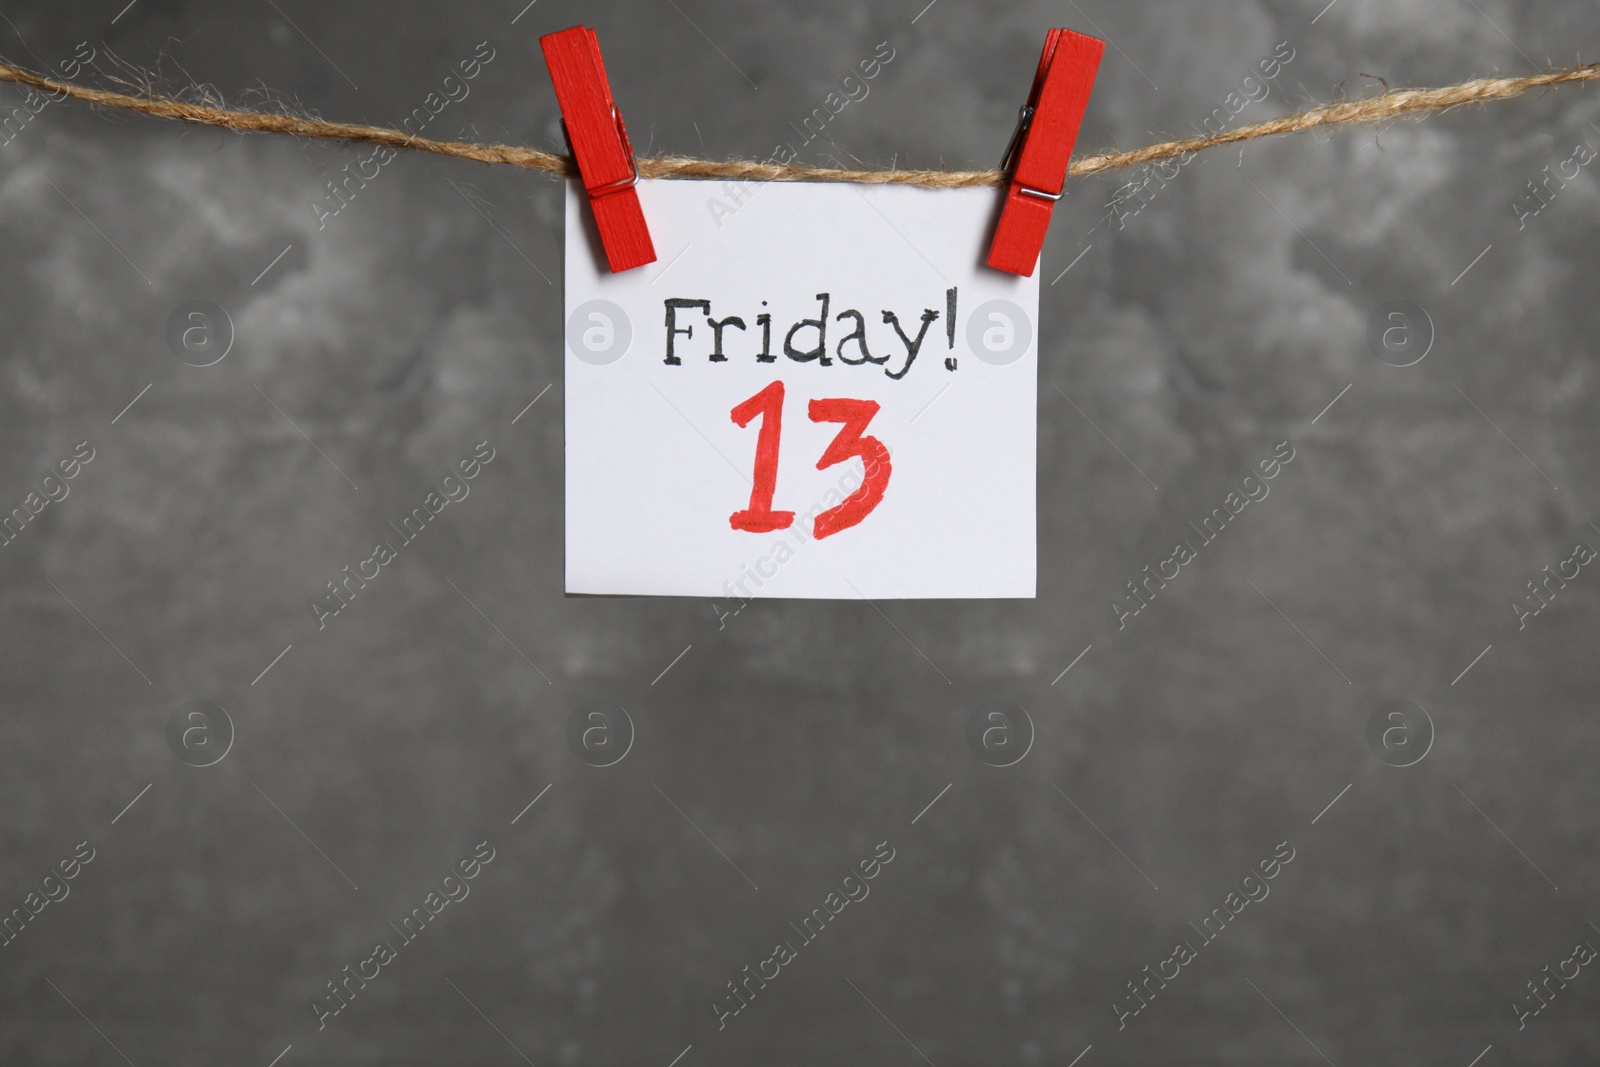 Photo of Paper note with phrase Friday! 13 hanging on twine against grey background, space for text. Bad luck superstition